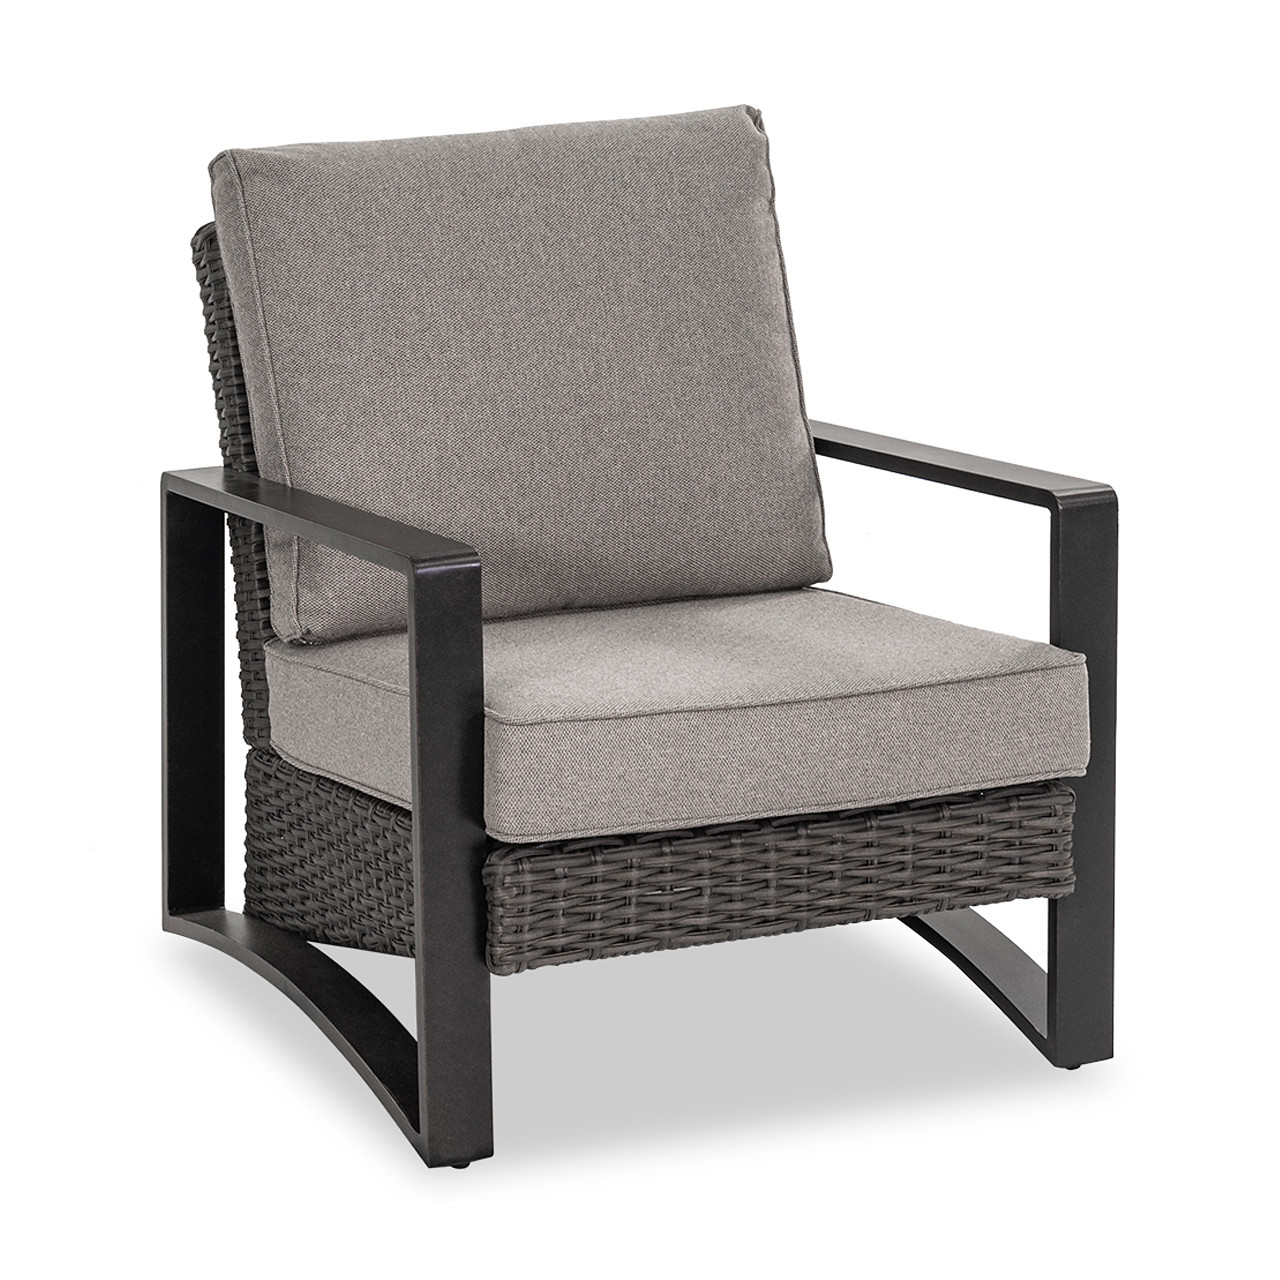 Sienna Aged Bronze Aluminum and Outdoor Wicker with Sea Leaf 3 pc. Cushion Seating with 52 x 28 in. Coffee Table